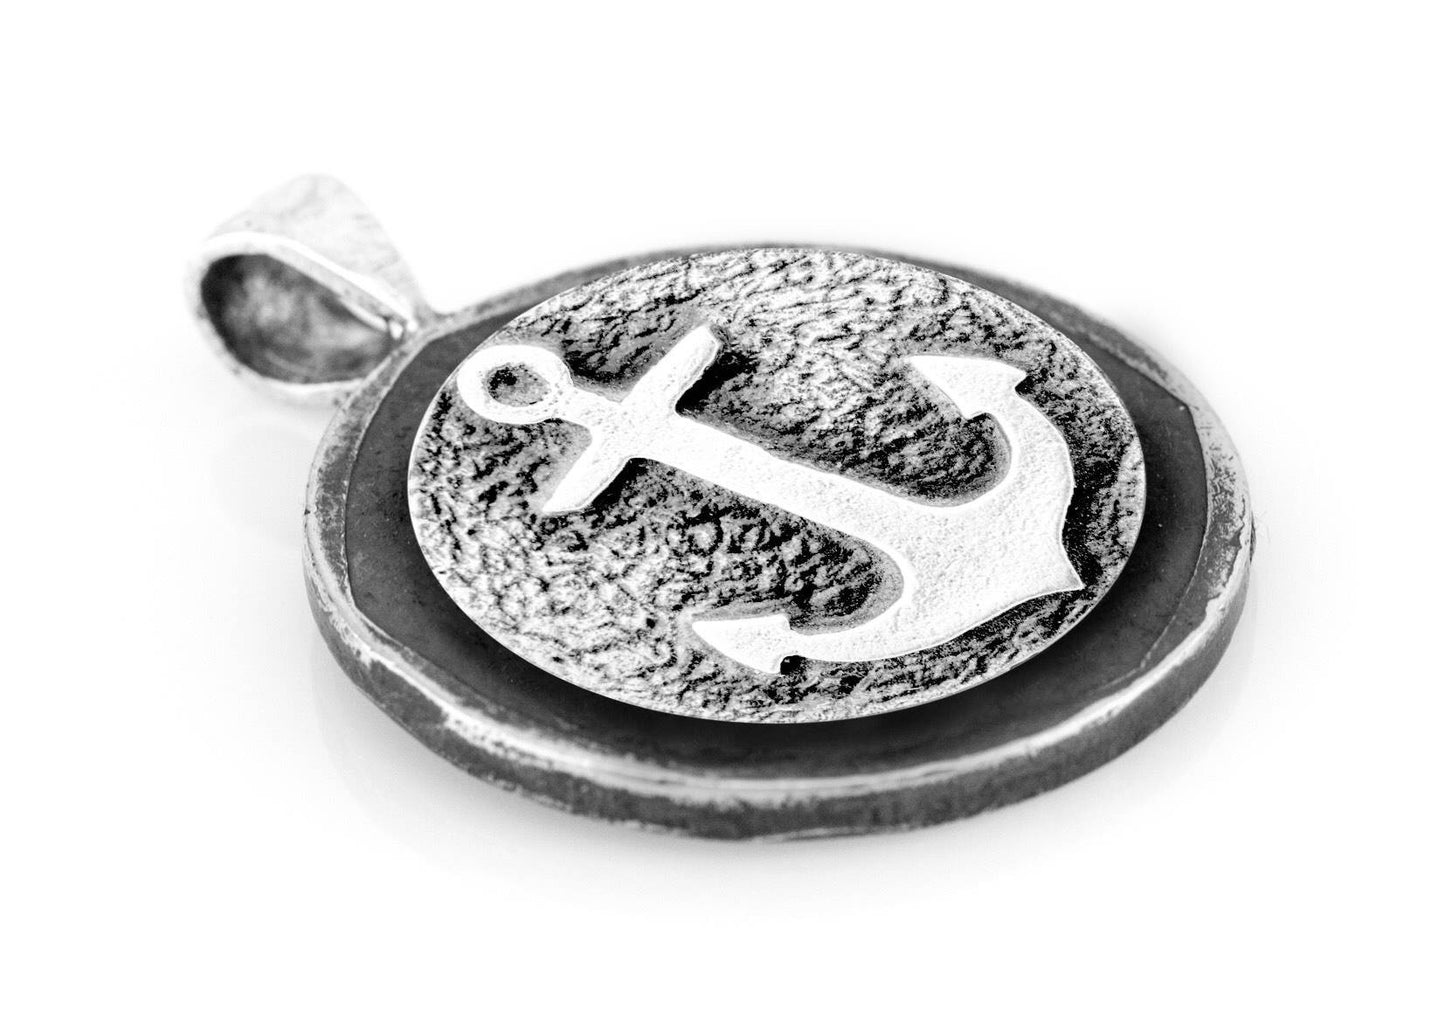 Anchor Medallion Pendant on Buffalo Nickel coin of USA Necklace - Sea Jewelry